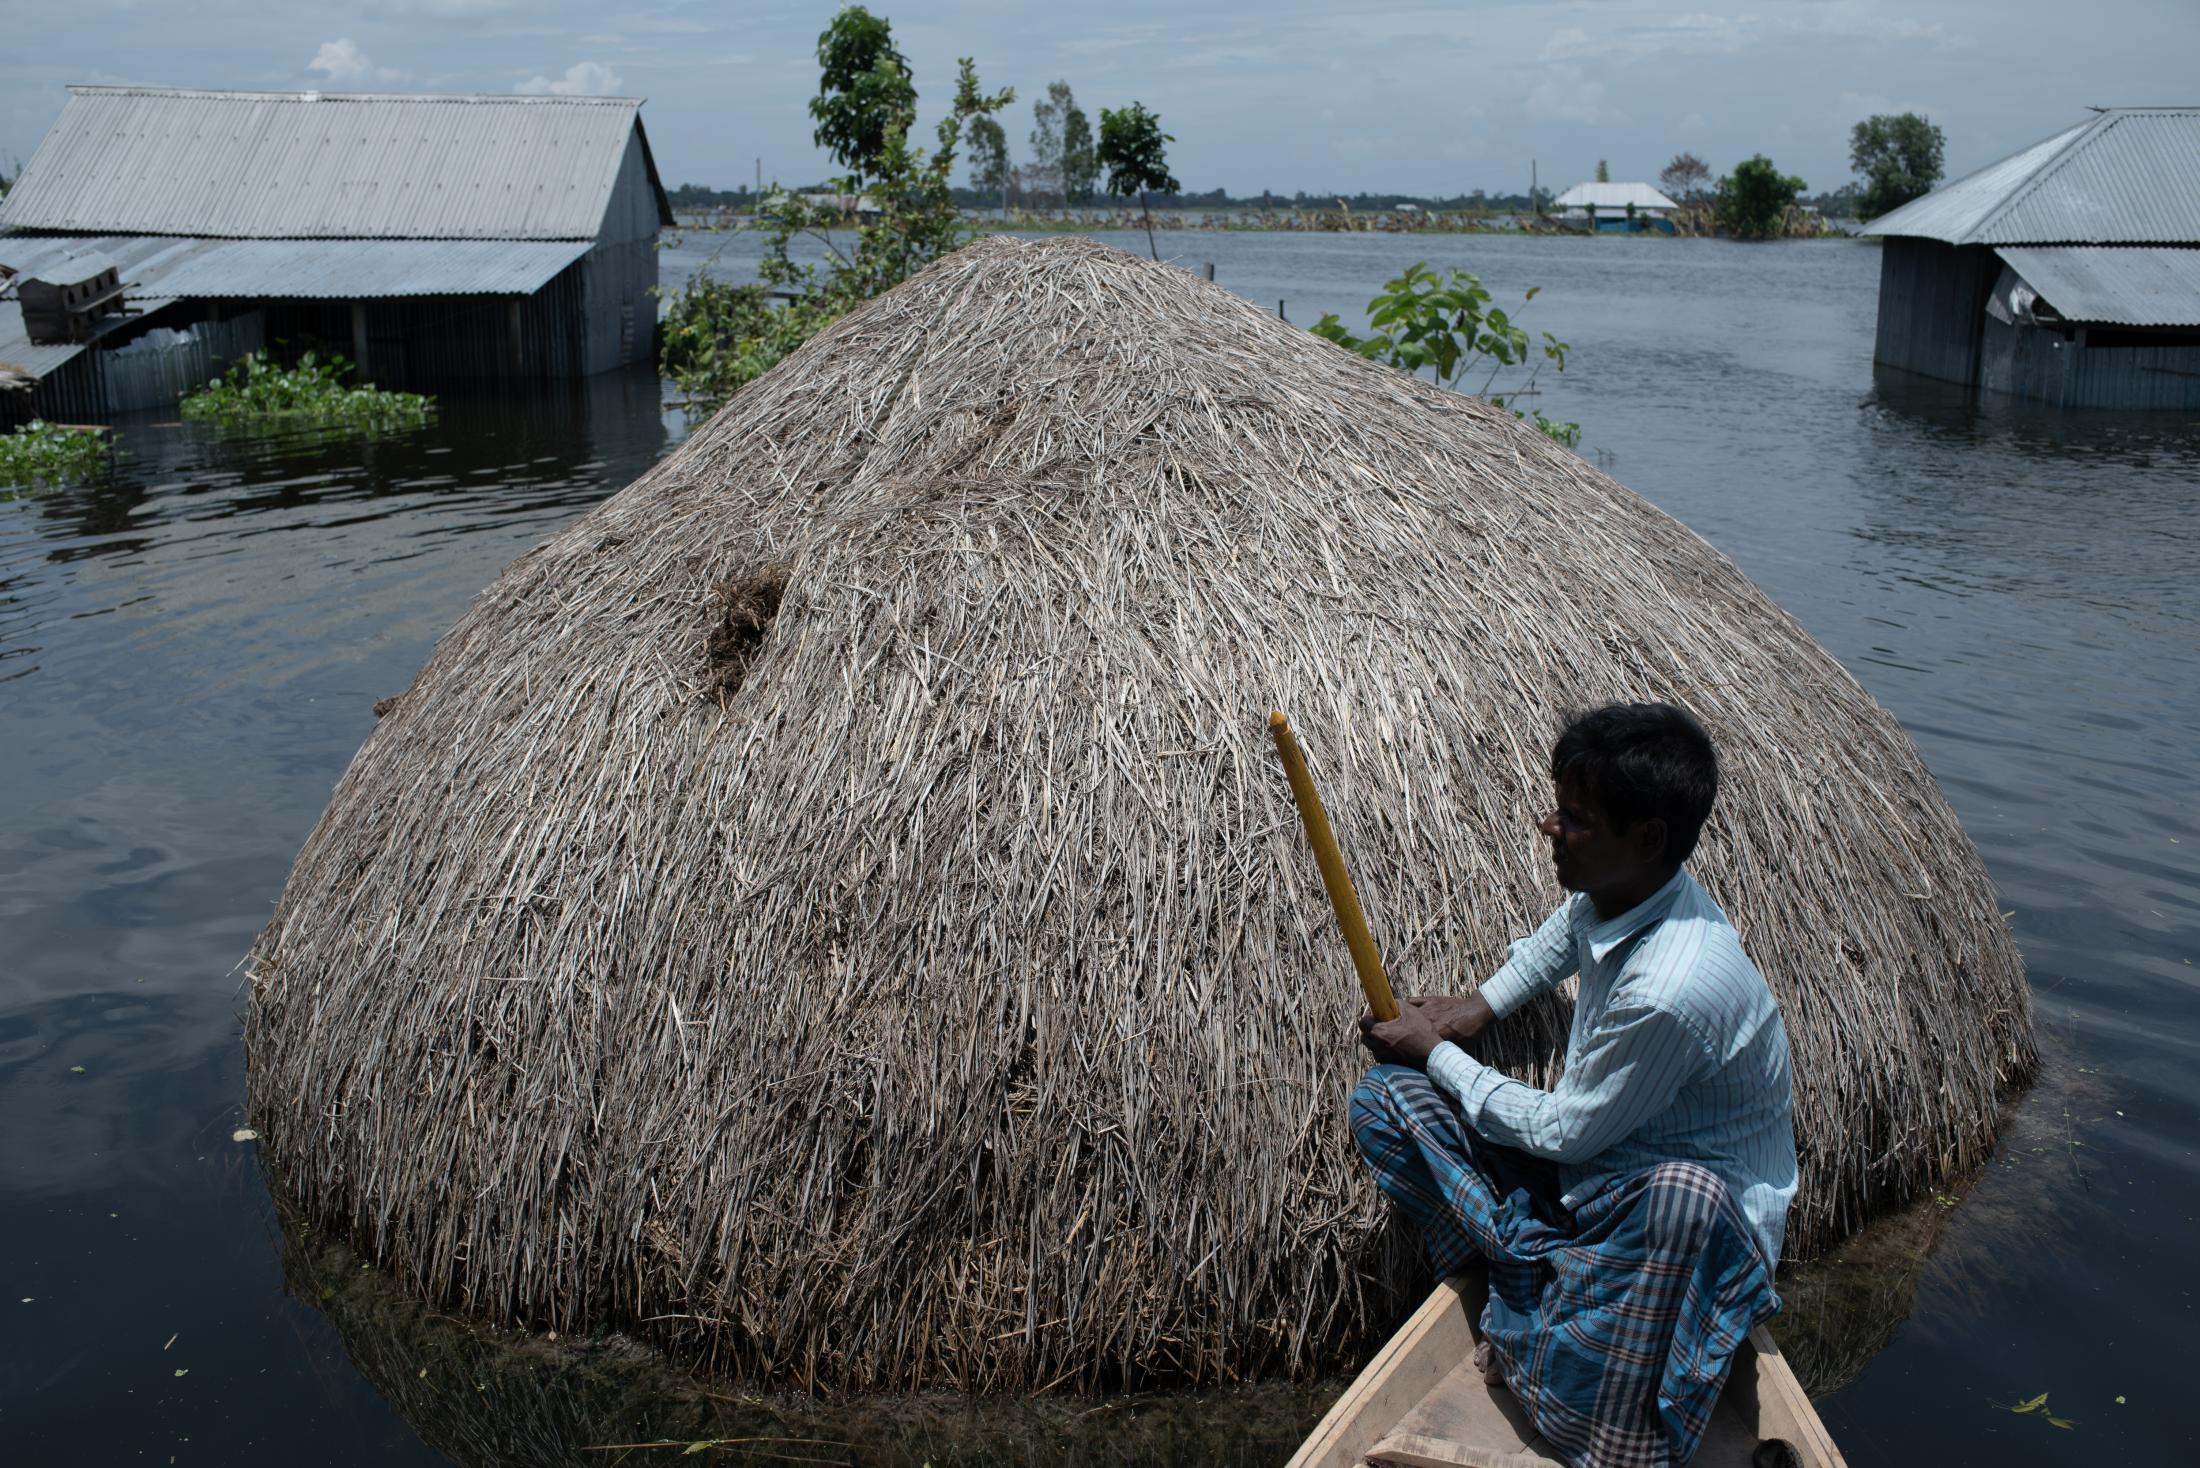 The Depth of Flood - A man visits his house by boat which got flooded in...